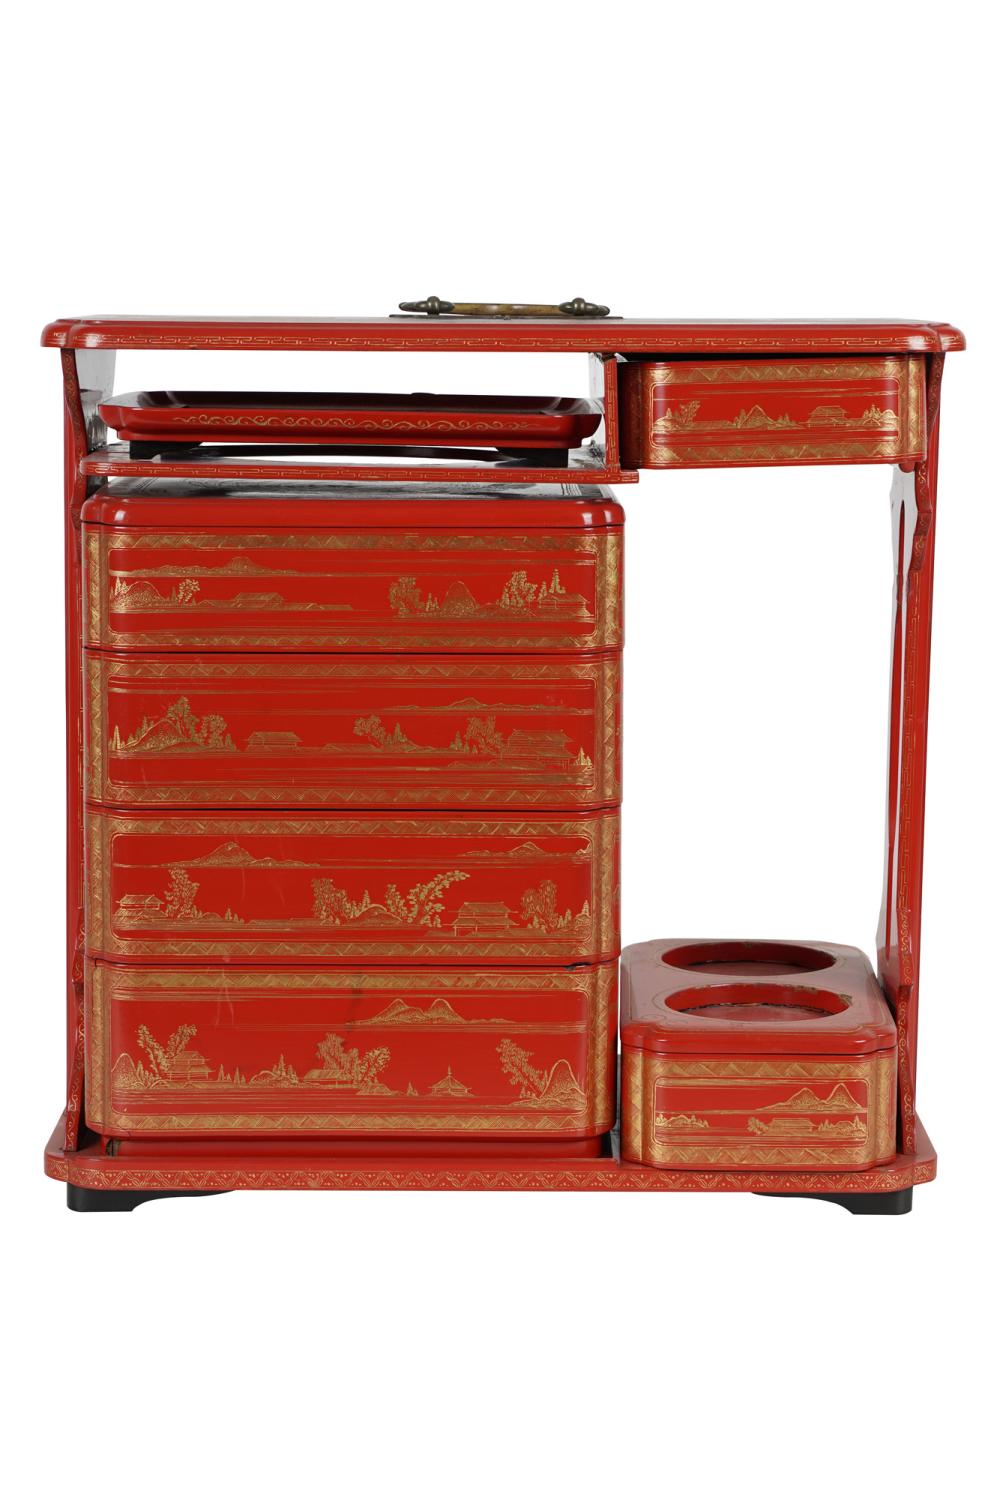 JAPANESE RED GILT LACQUERED STACK 33622e